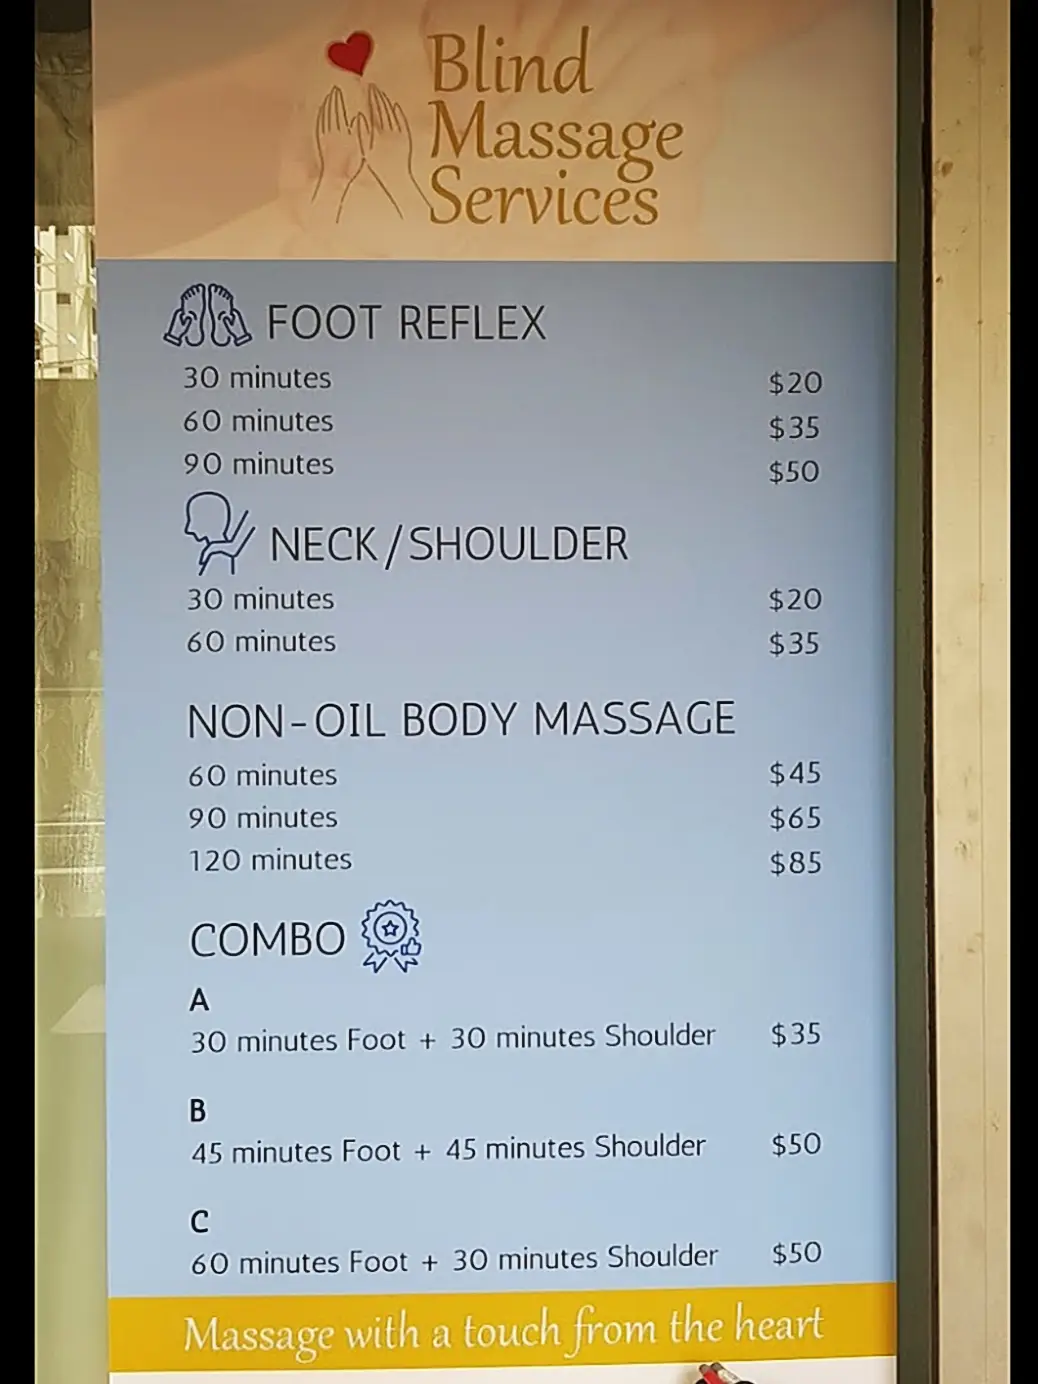 my future go-to massage place from now on 🥰's images(1)